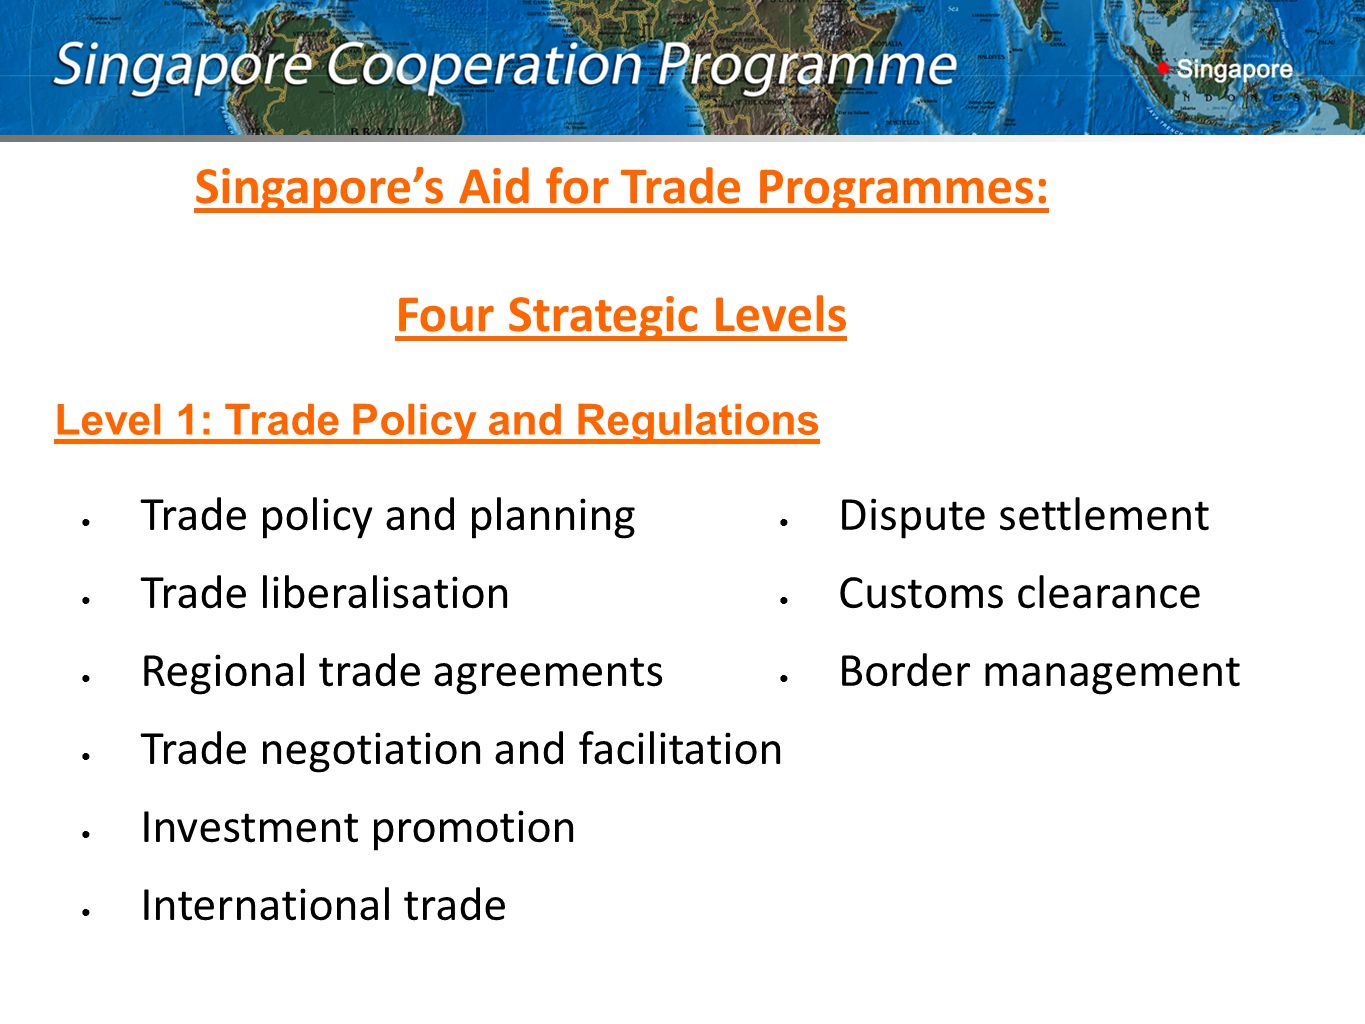 Trade policy and planning Trade liberalisation Regional trade agreements Trade negotiation and facilitation Investment promotion International trade Dispute settlement Customs clearance Border management Singapore’s Aid for Trade Programmes: Four Strategic Levels Level 1: Trade Policy and Regulations